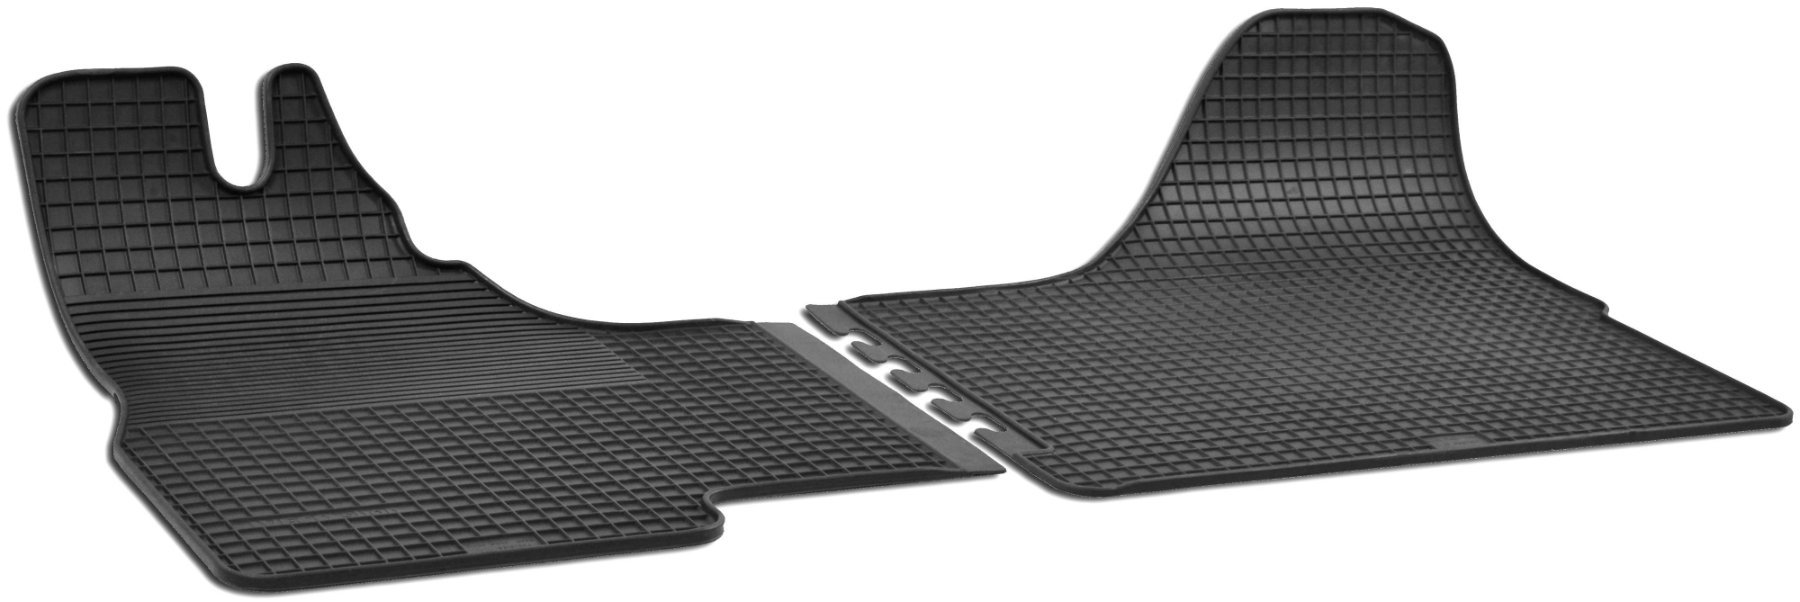 Tapis en caoutchouc RubberLine pour Iveco Daily III 11/1197-10/2009, Daily IV 05/2006-2012, Daily V 09/2011-02/2014